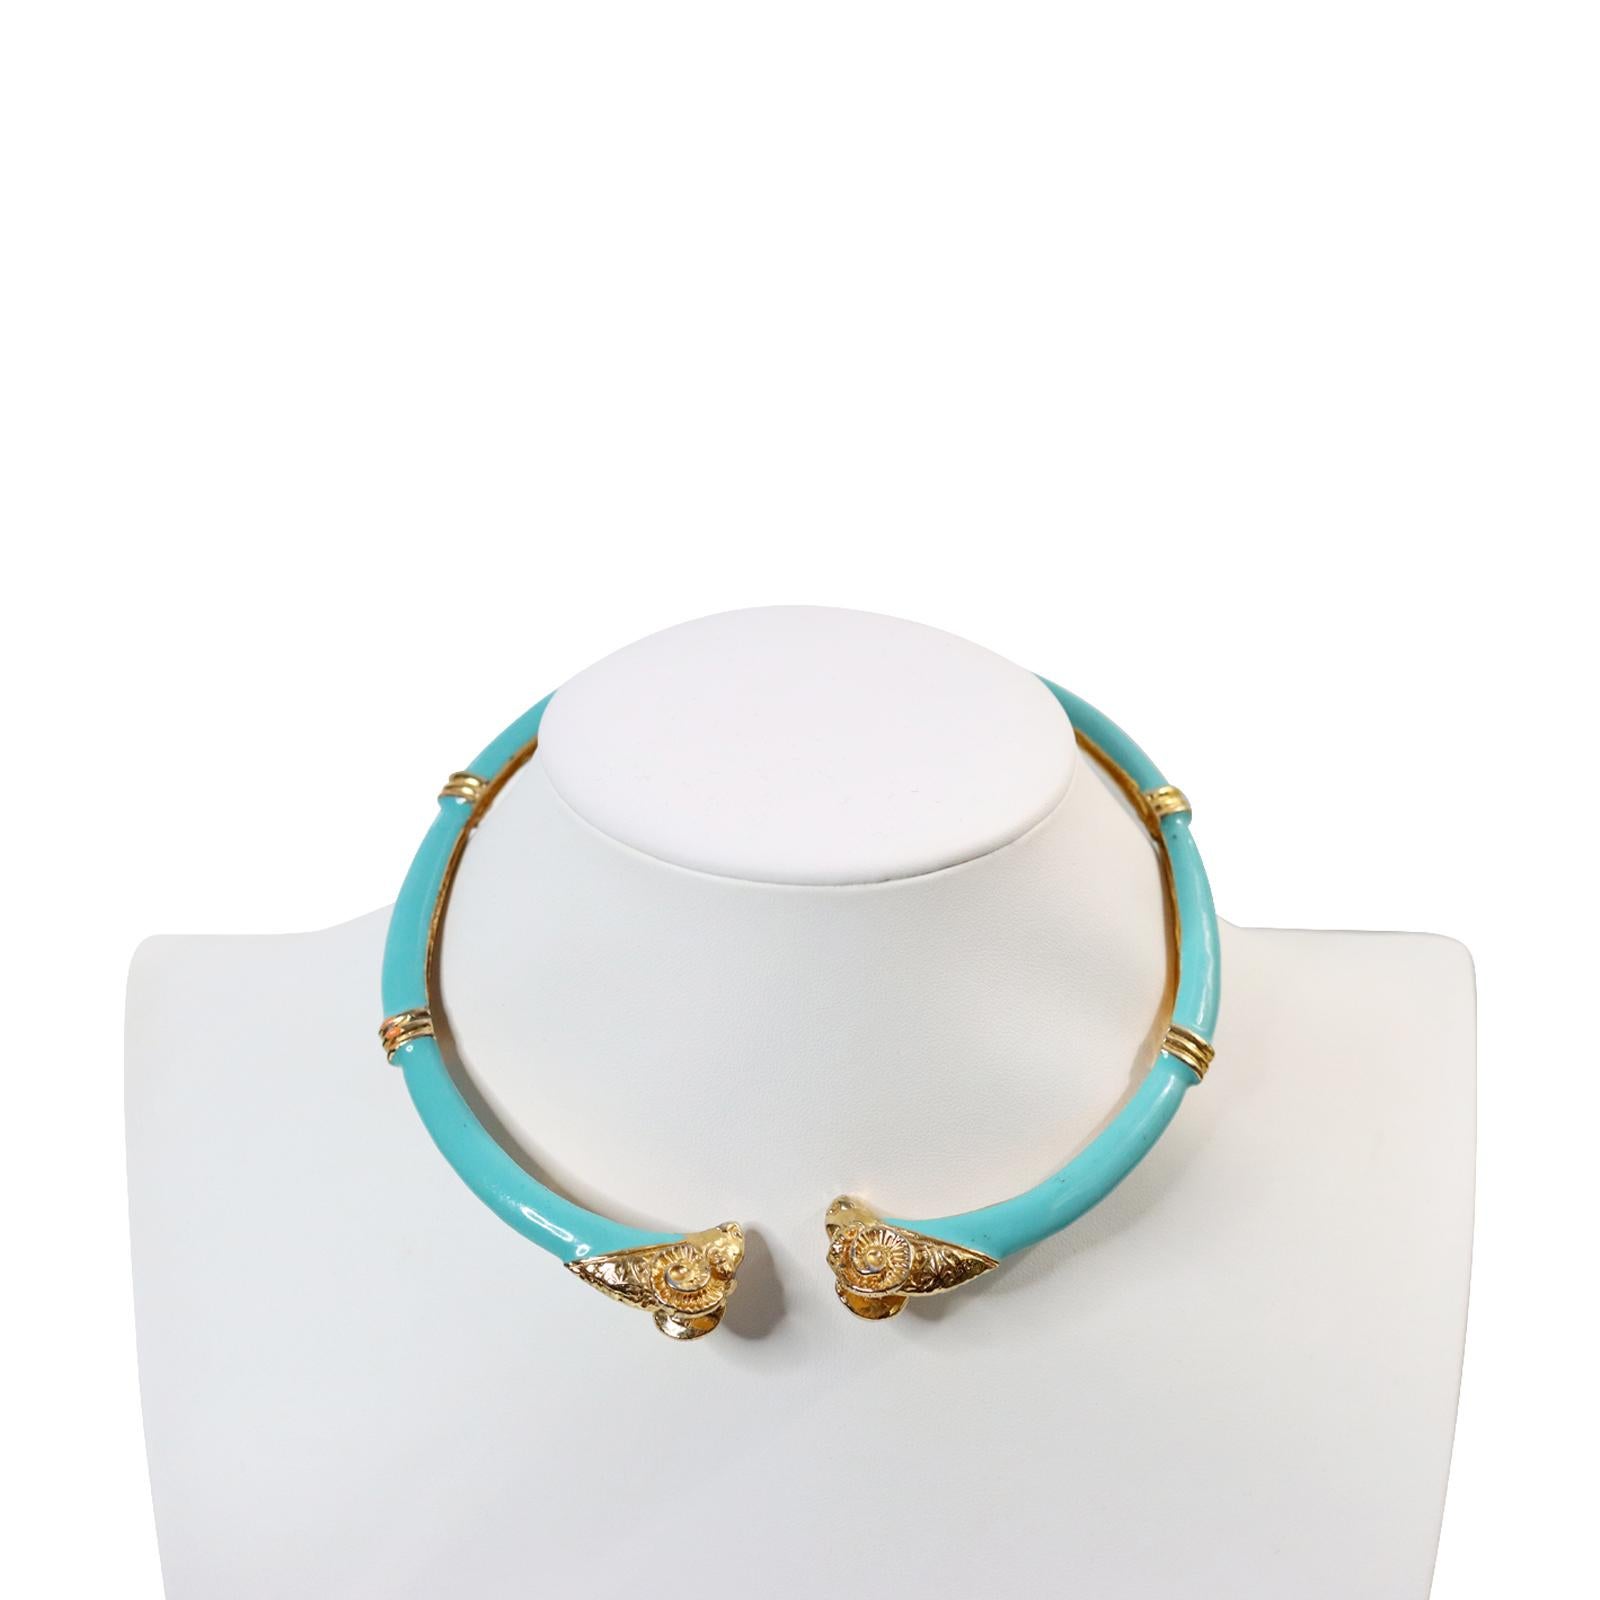 Vintage Donald Stannard Rams Head Choker in Turquoise and Gold Circa 1980s 1